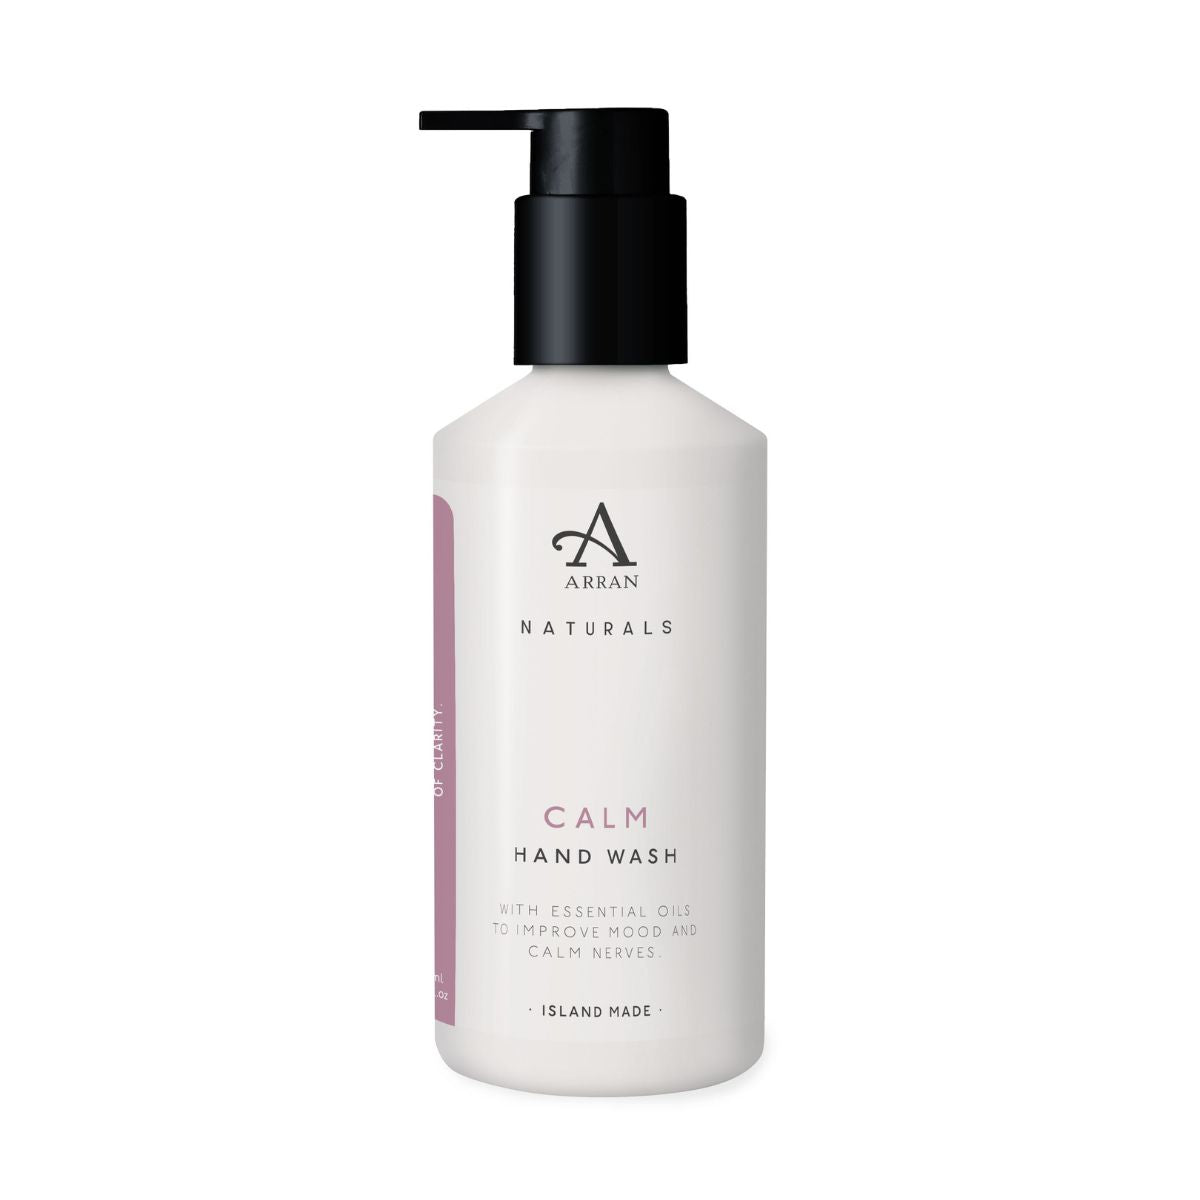 An image of Natural Hand Wash - ARRAN Calm Lavender & Chamomile Hand Wash | Made in Scotland